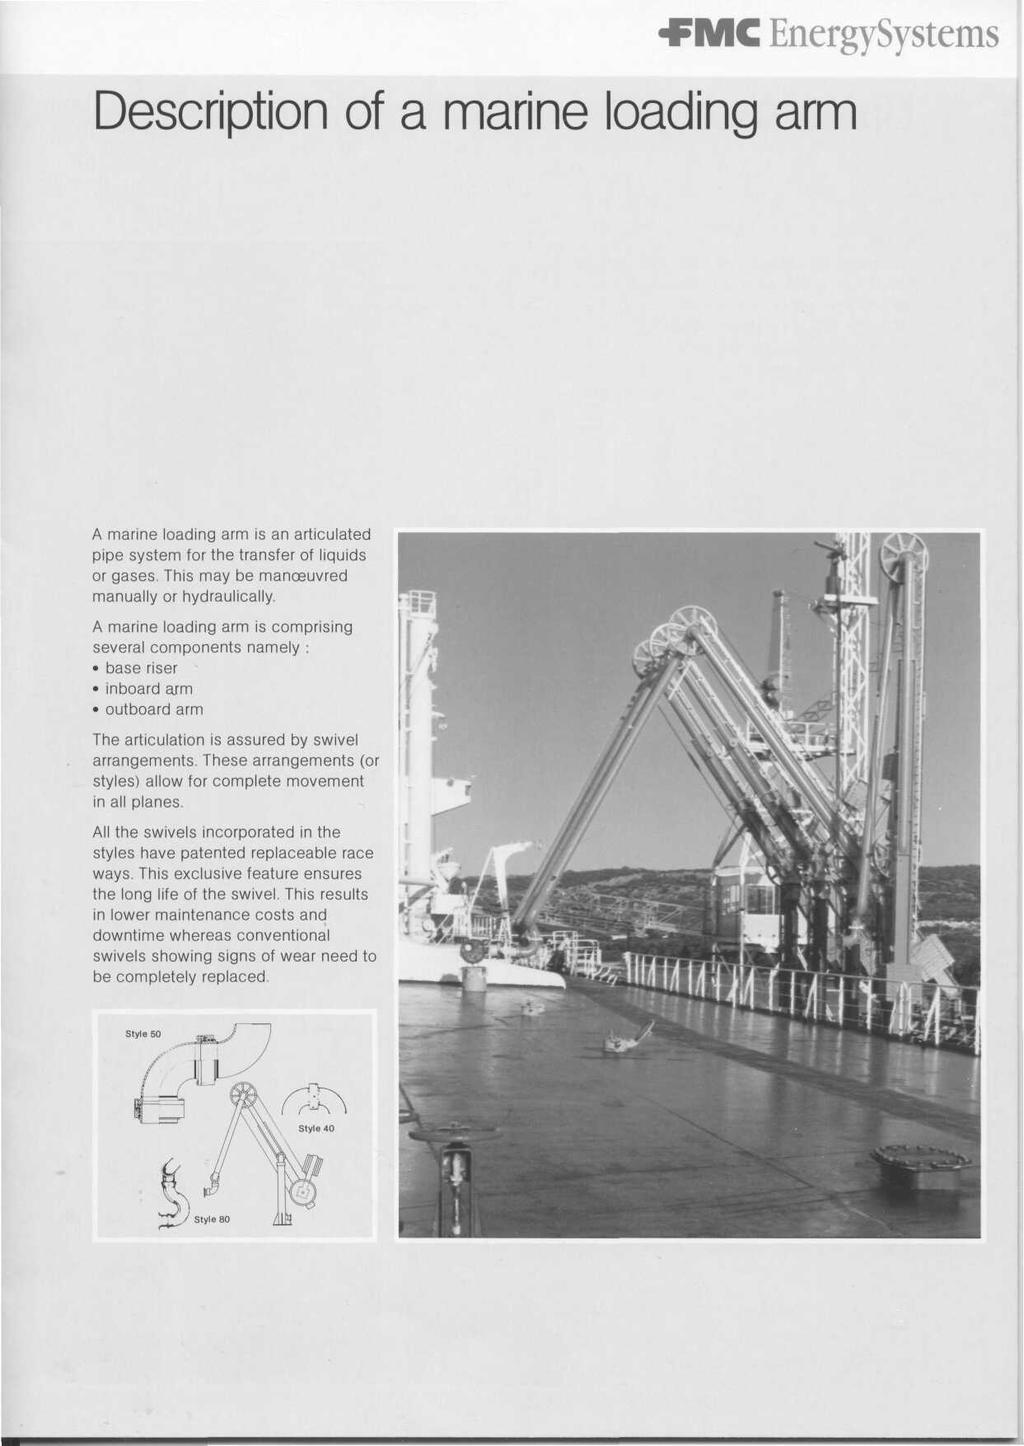 ФМС EnergySystems Description of a marine loading arm A marine loading arm is an articulated pipe system for the transfer of liquids or gases. This may be manoeuvred manually or hydraulically.